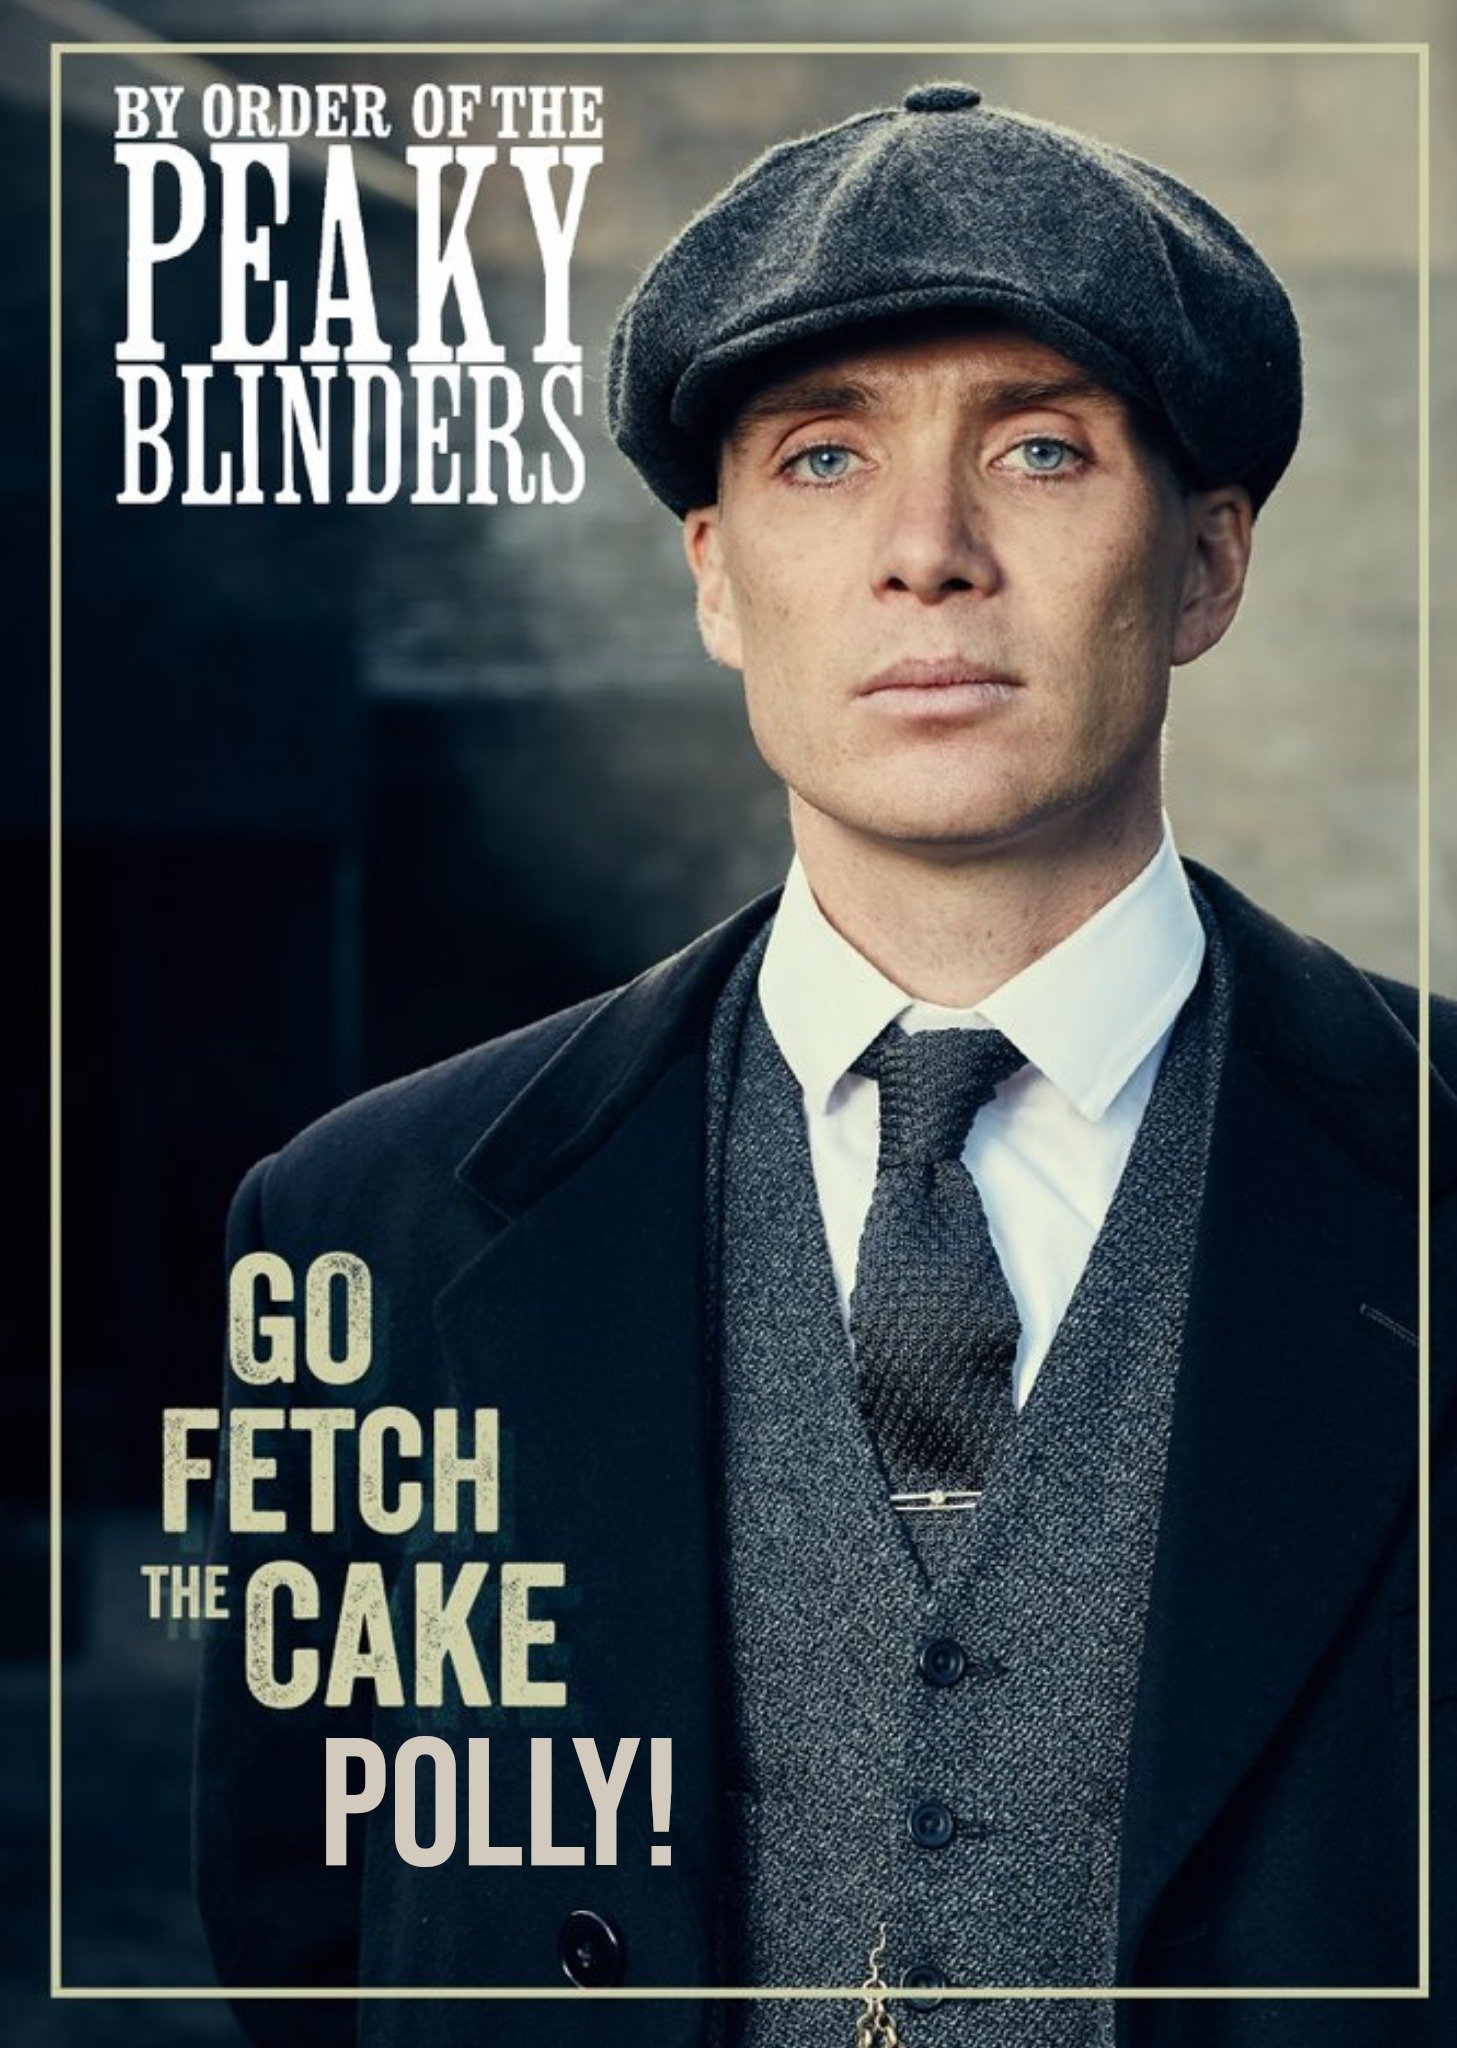 Peaky Blinders Go Fetch The Cake Personalised Birthday Card, Large